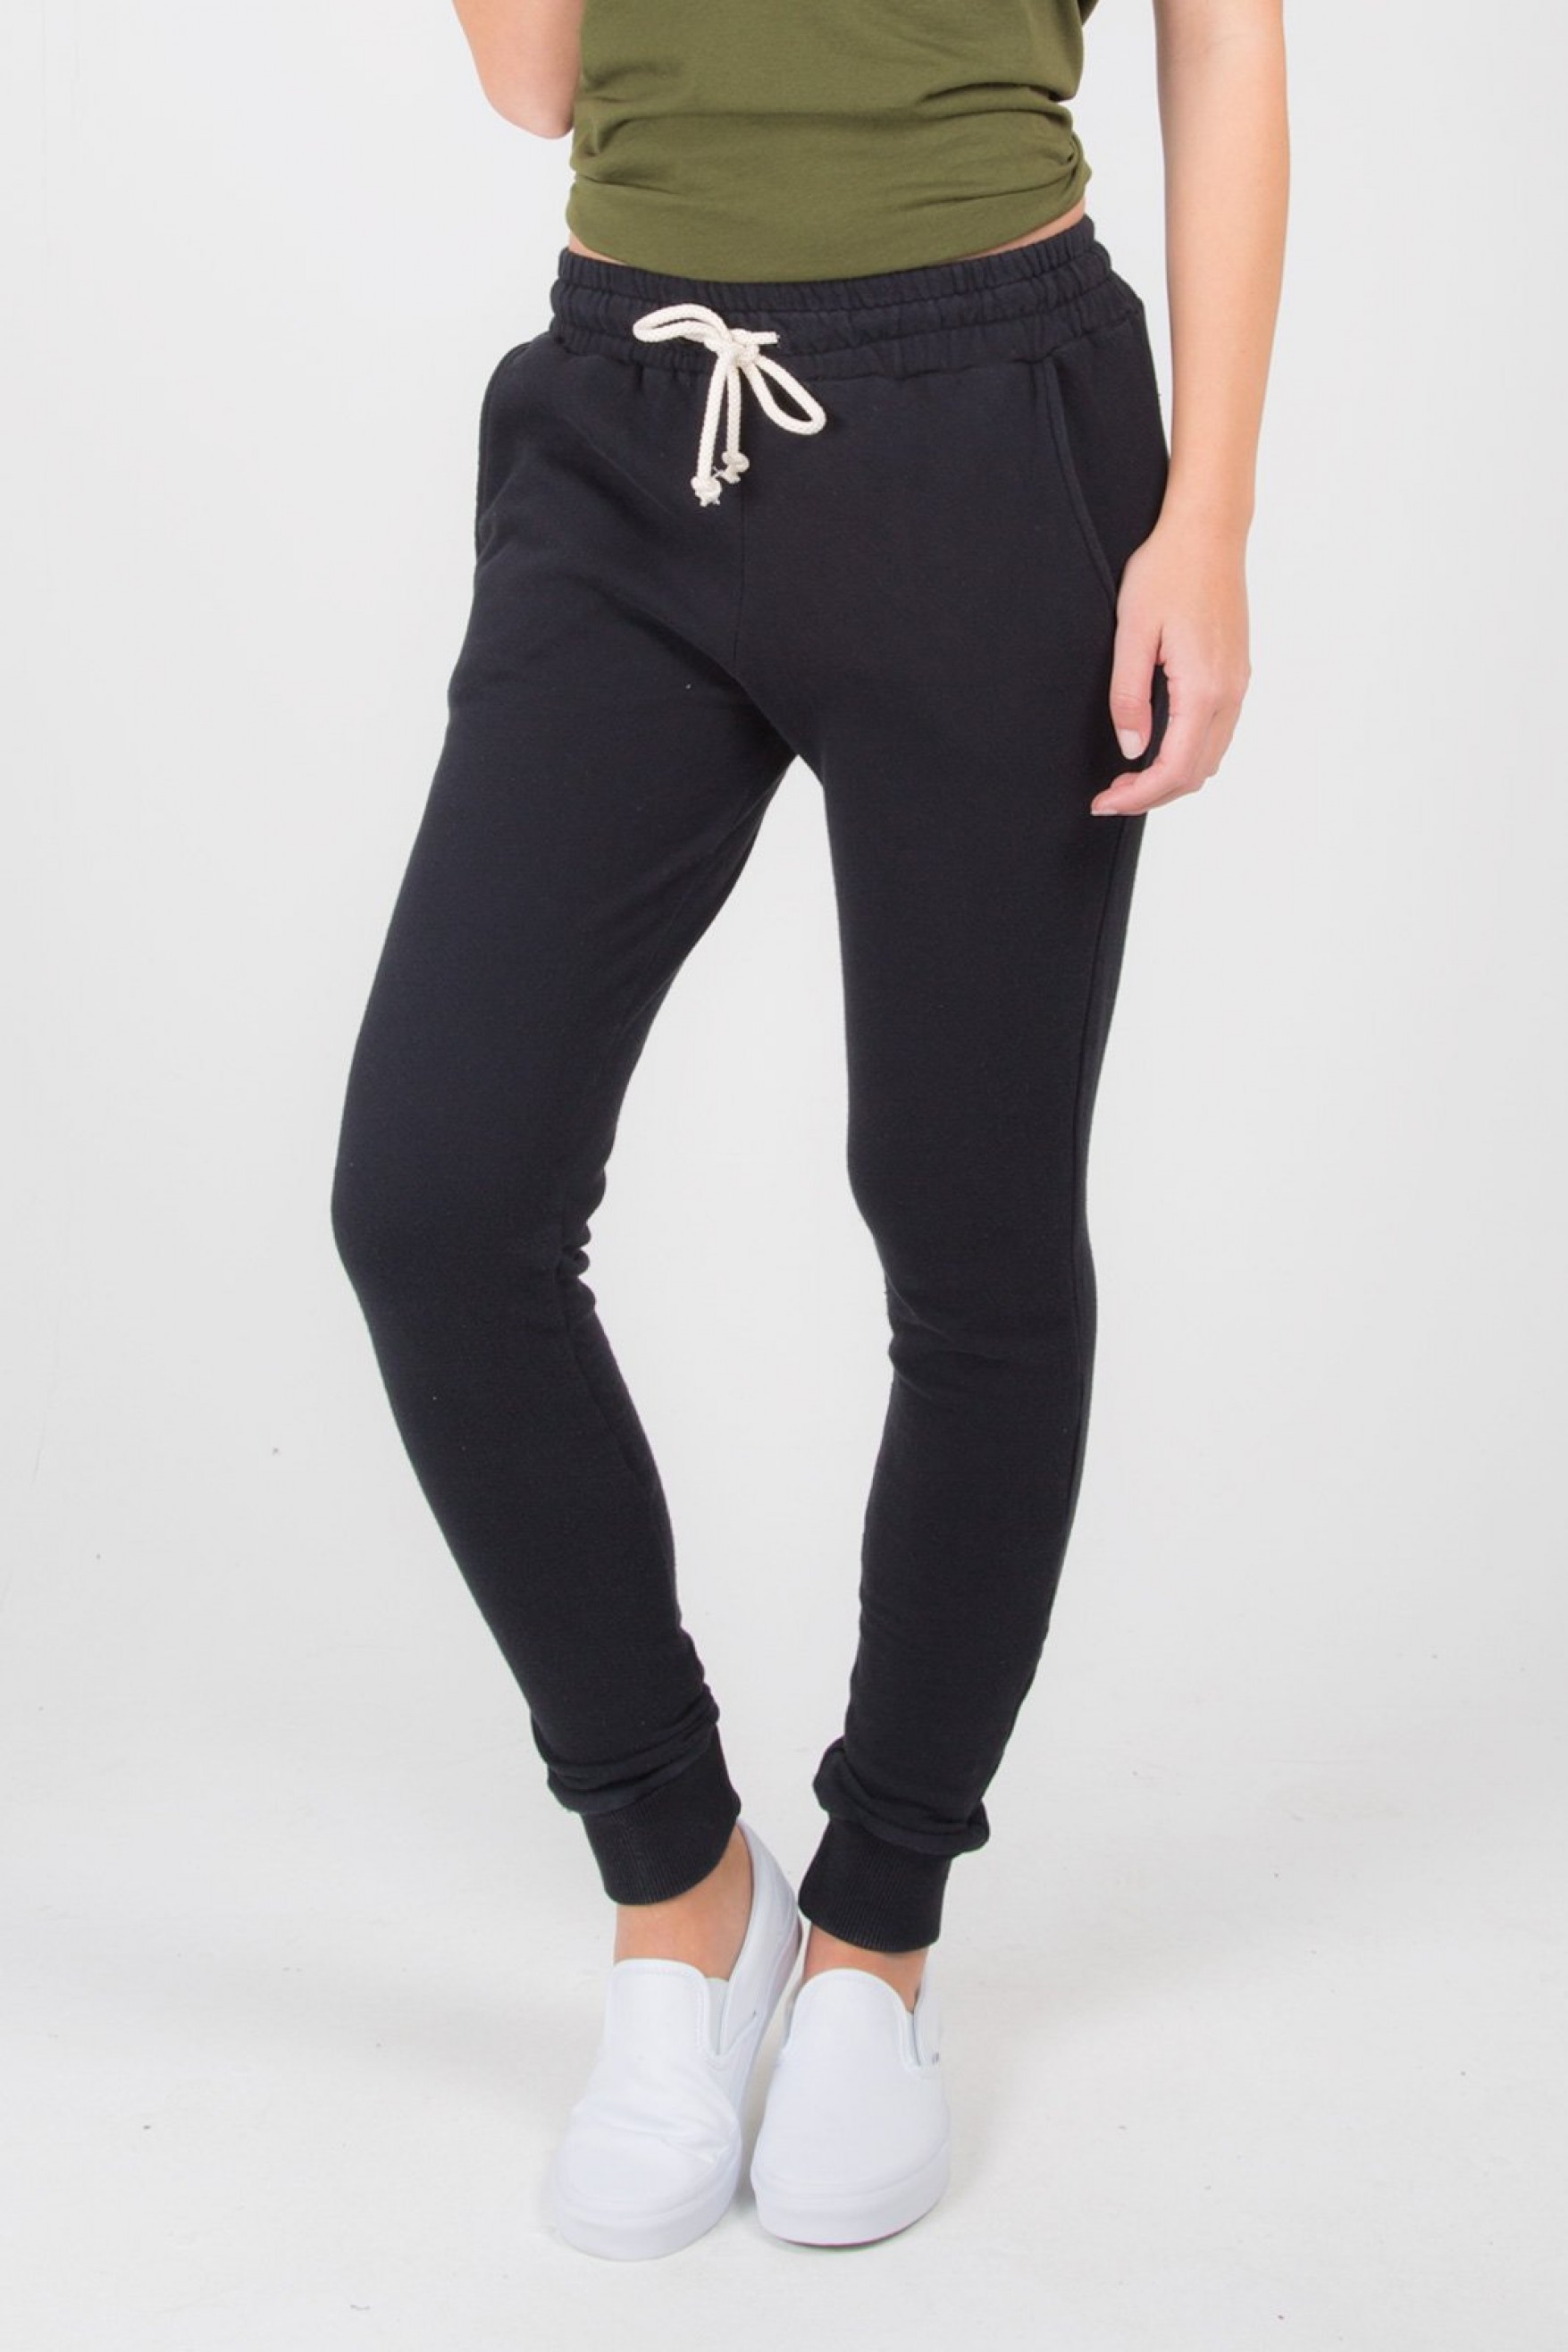 BeGym Joggers for Women  5 Benefits of Wearing Sweat Pants in the Gym